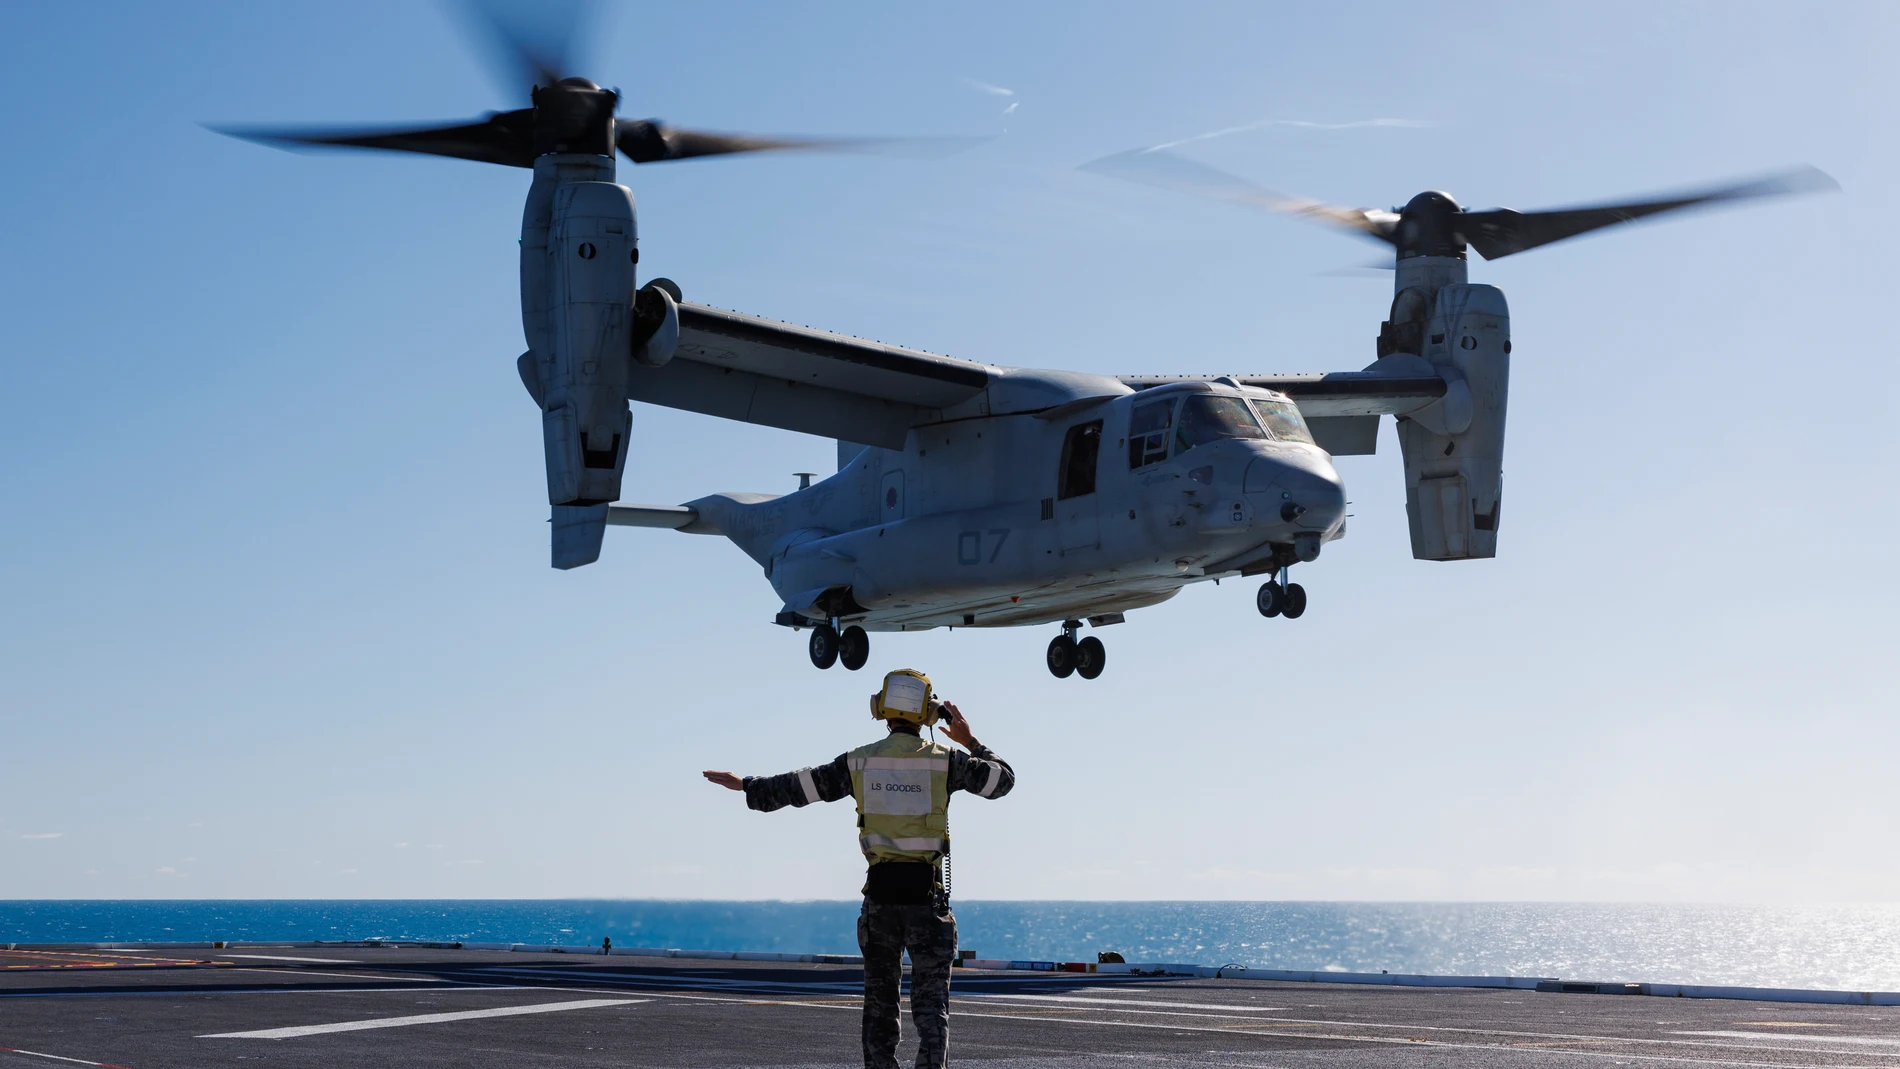 Royal Australian Navy sailor Leading Seaman Jayden Goodes guides a U.S. Marine Corps MV-22 Osprey during take-off and landing practice on the flight deck of HMAS Adelaide in the Whitsunday Islands off the coast of Australia during Exercise Sea Raider, Aug. 7, 2023. The Australian Defense Department said a Bell Boeing V-22 Osprey tiltrotor aircraft crashed on Melville Island, Sunday, Aug. 27, 2023 during Exercise Predators Run, which involves the militaries of the United States, Australia, Ind...